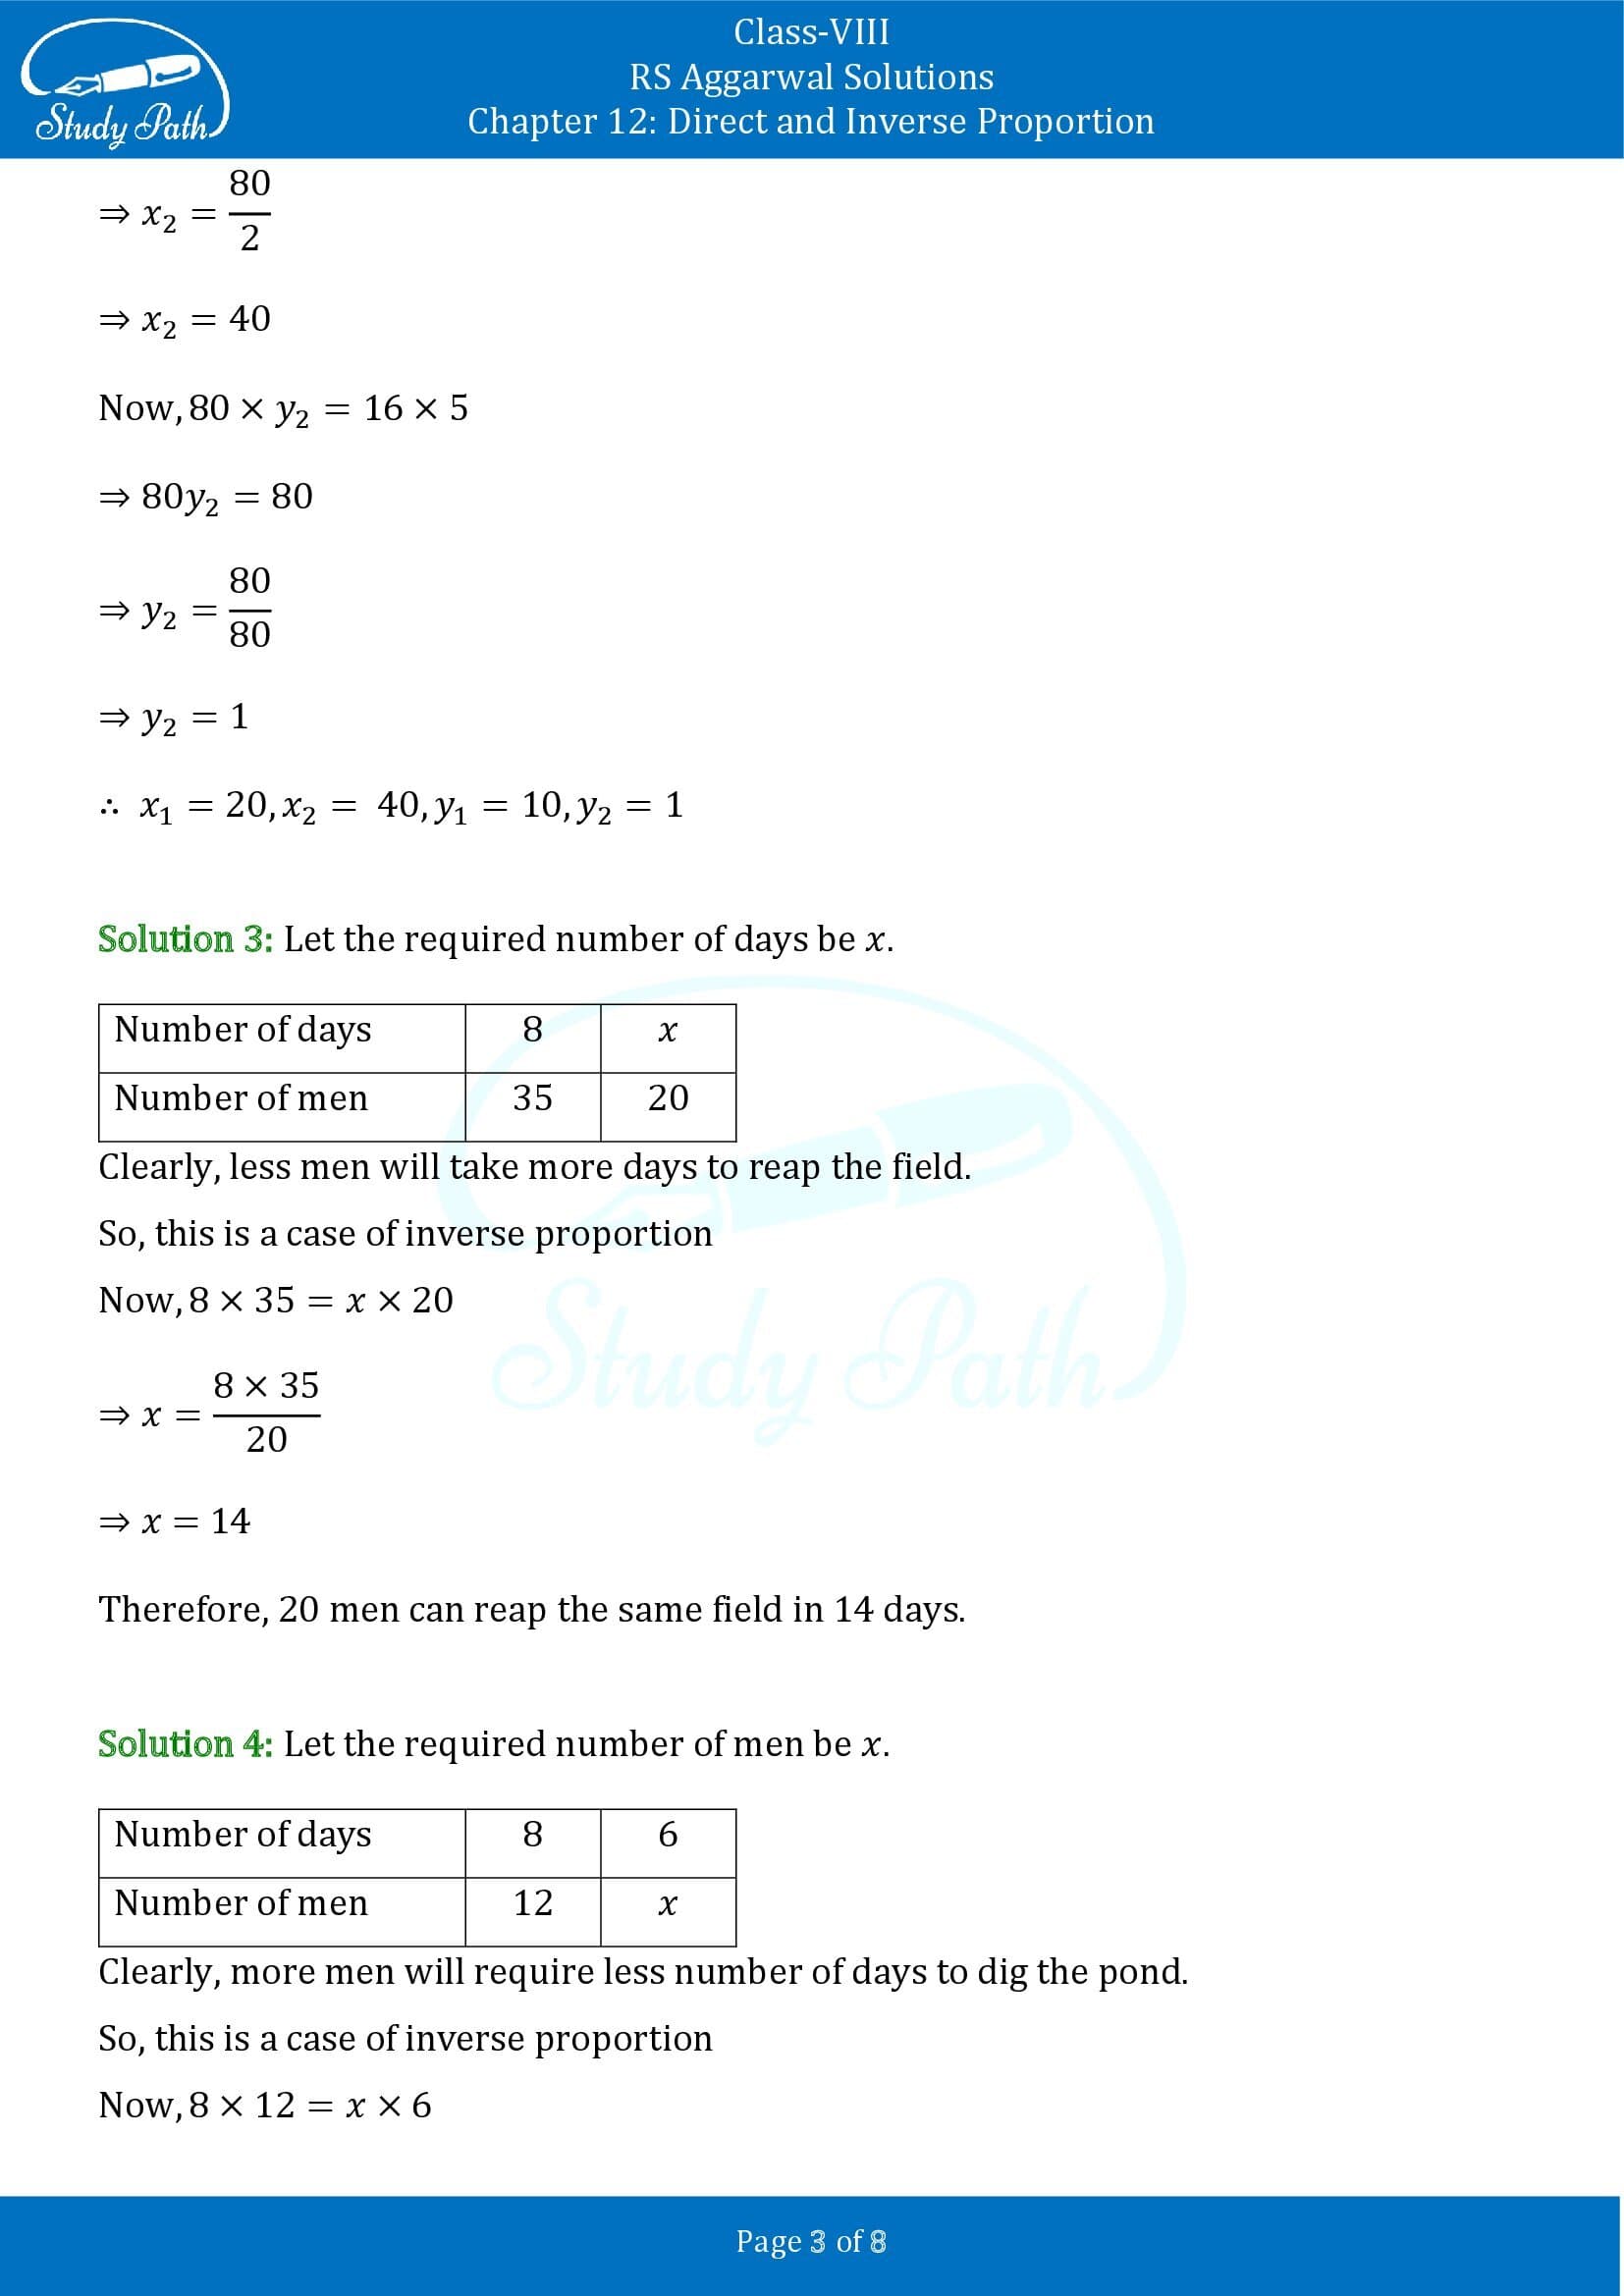 RS Aggarwal Solutions Class 8 Chapter 12 Direct and Inverse Proportion Exercise 12B 00003